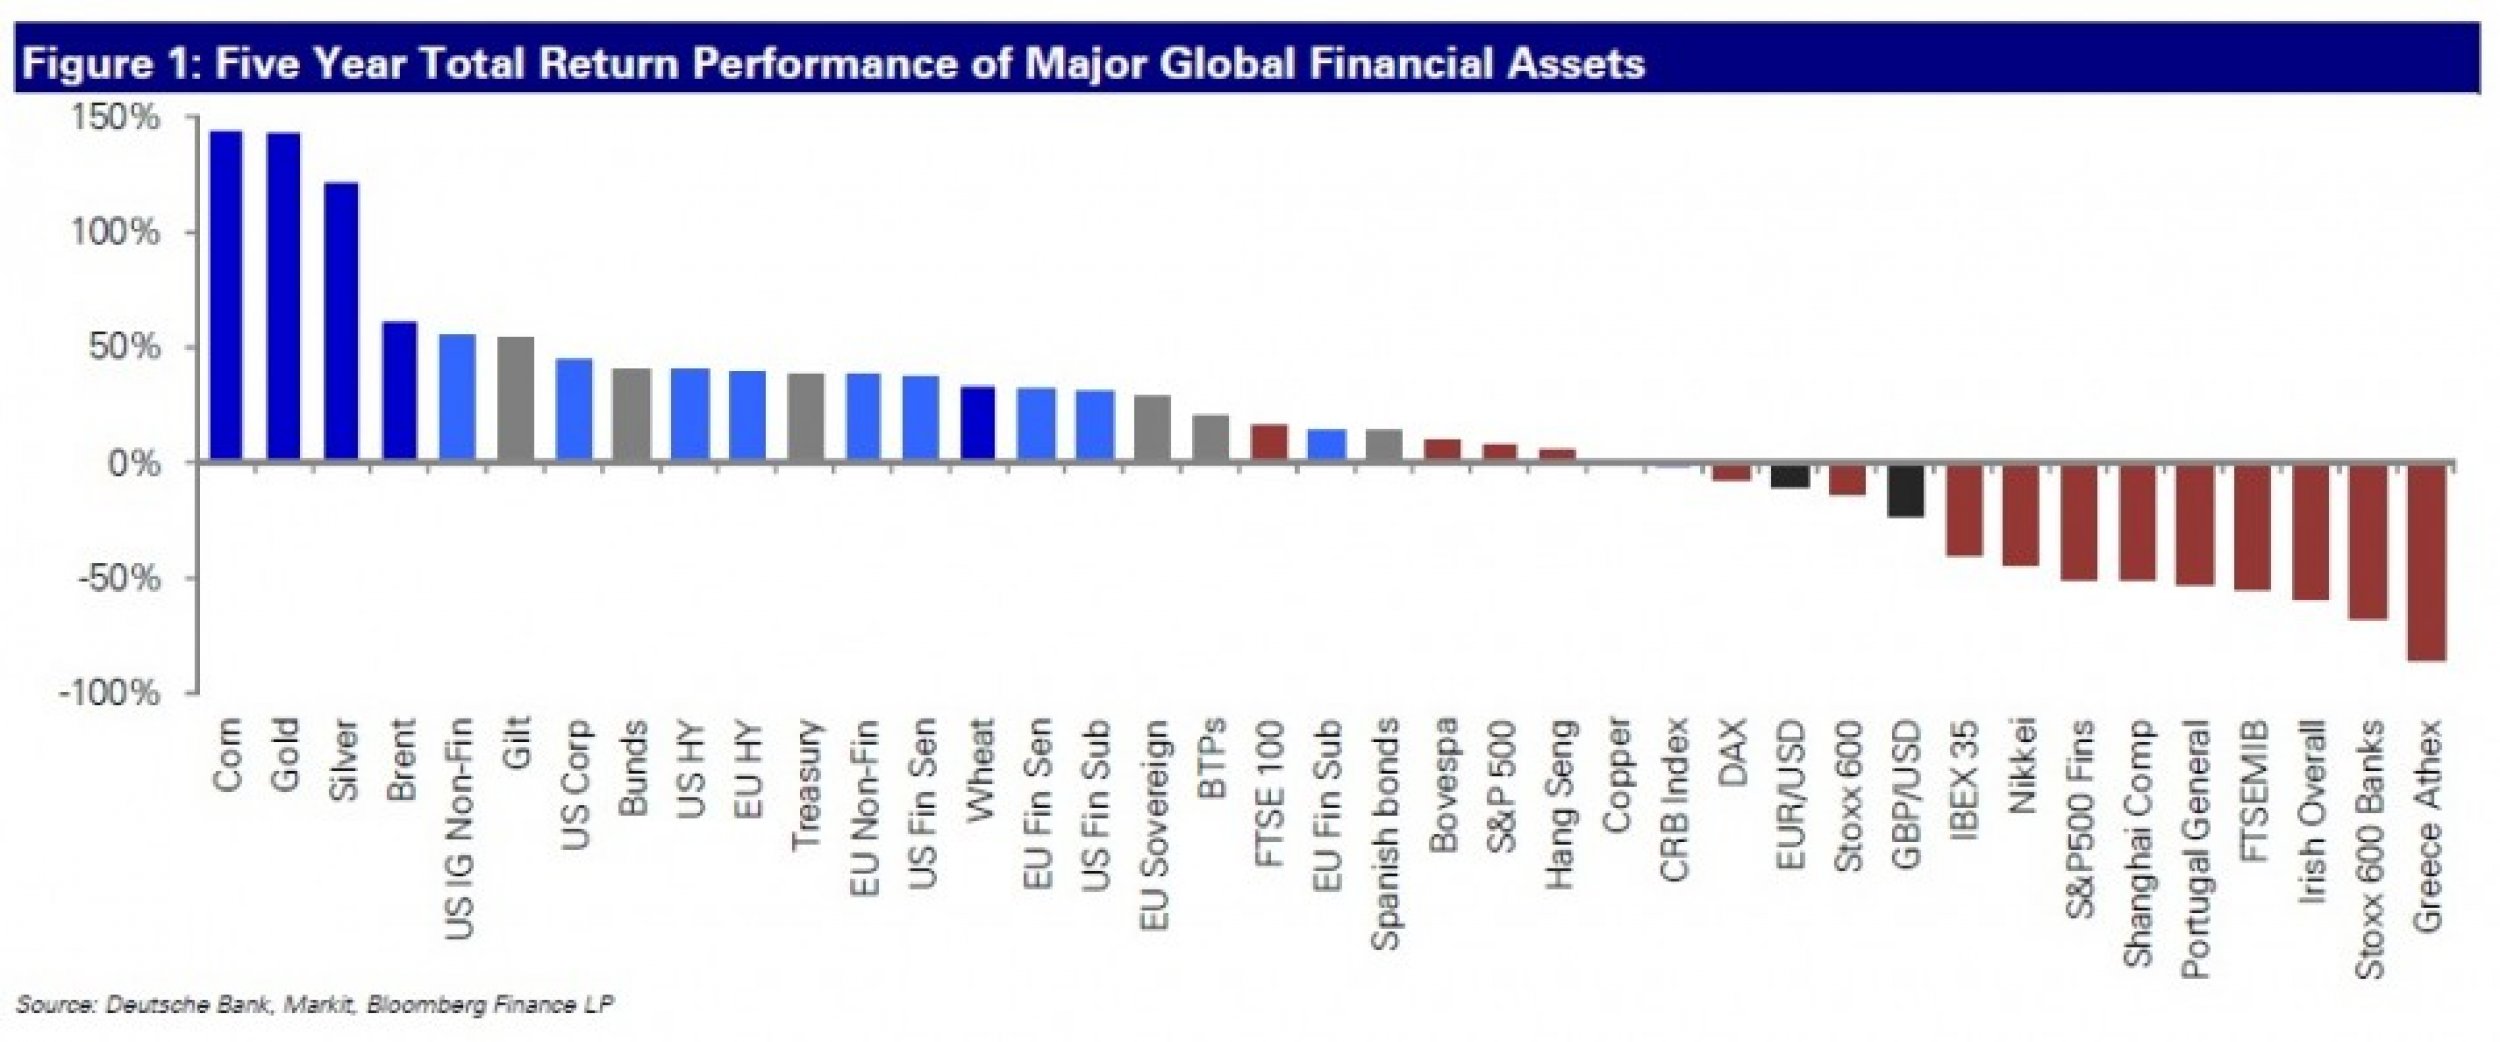 Deutsche Bank graph shows returns on various asset classes over the past five years.